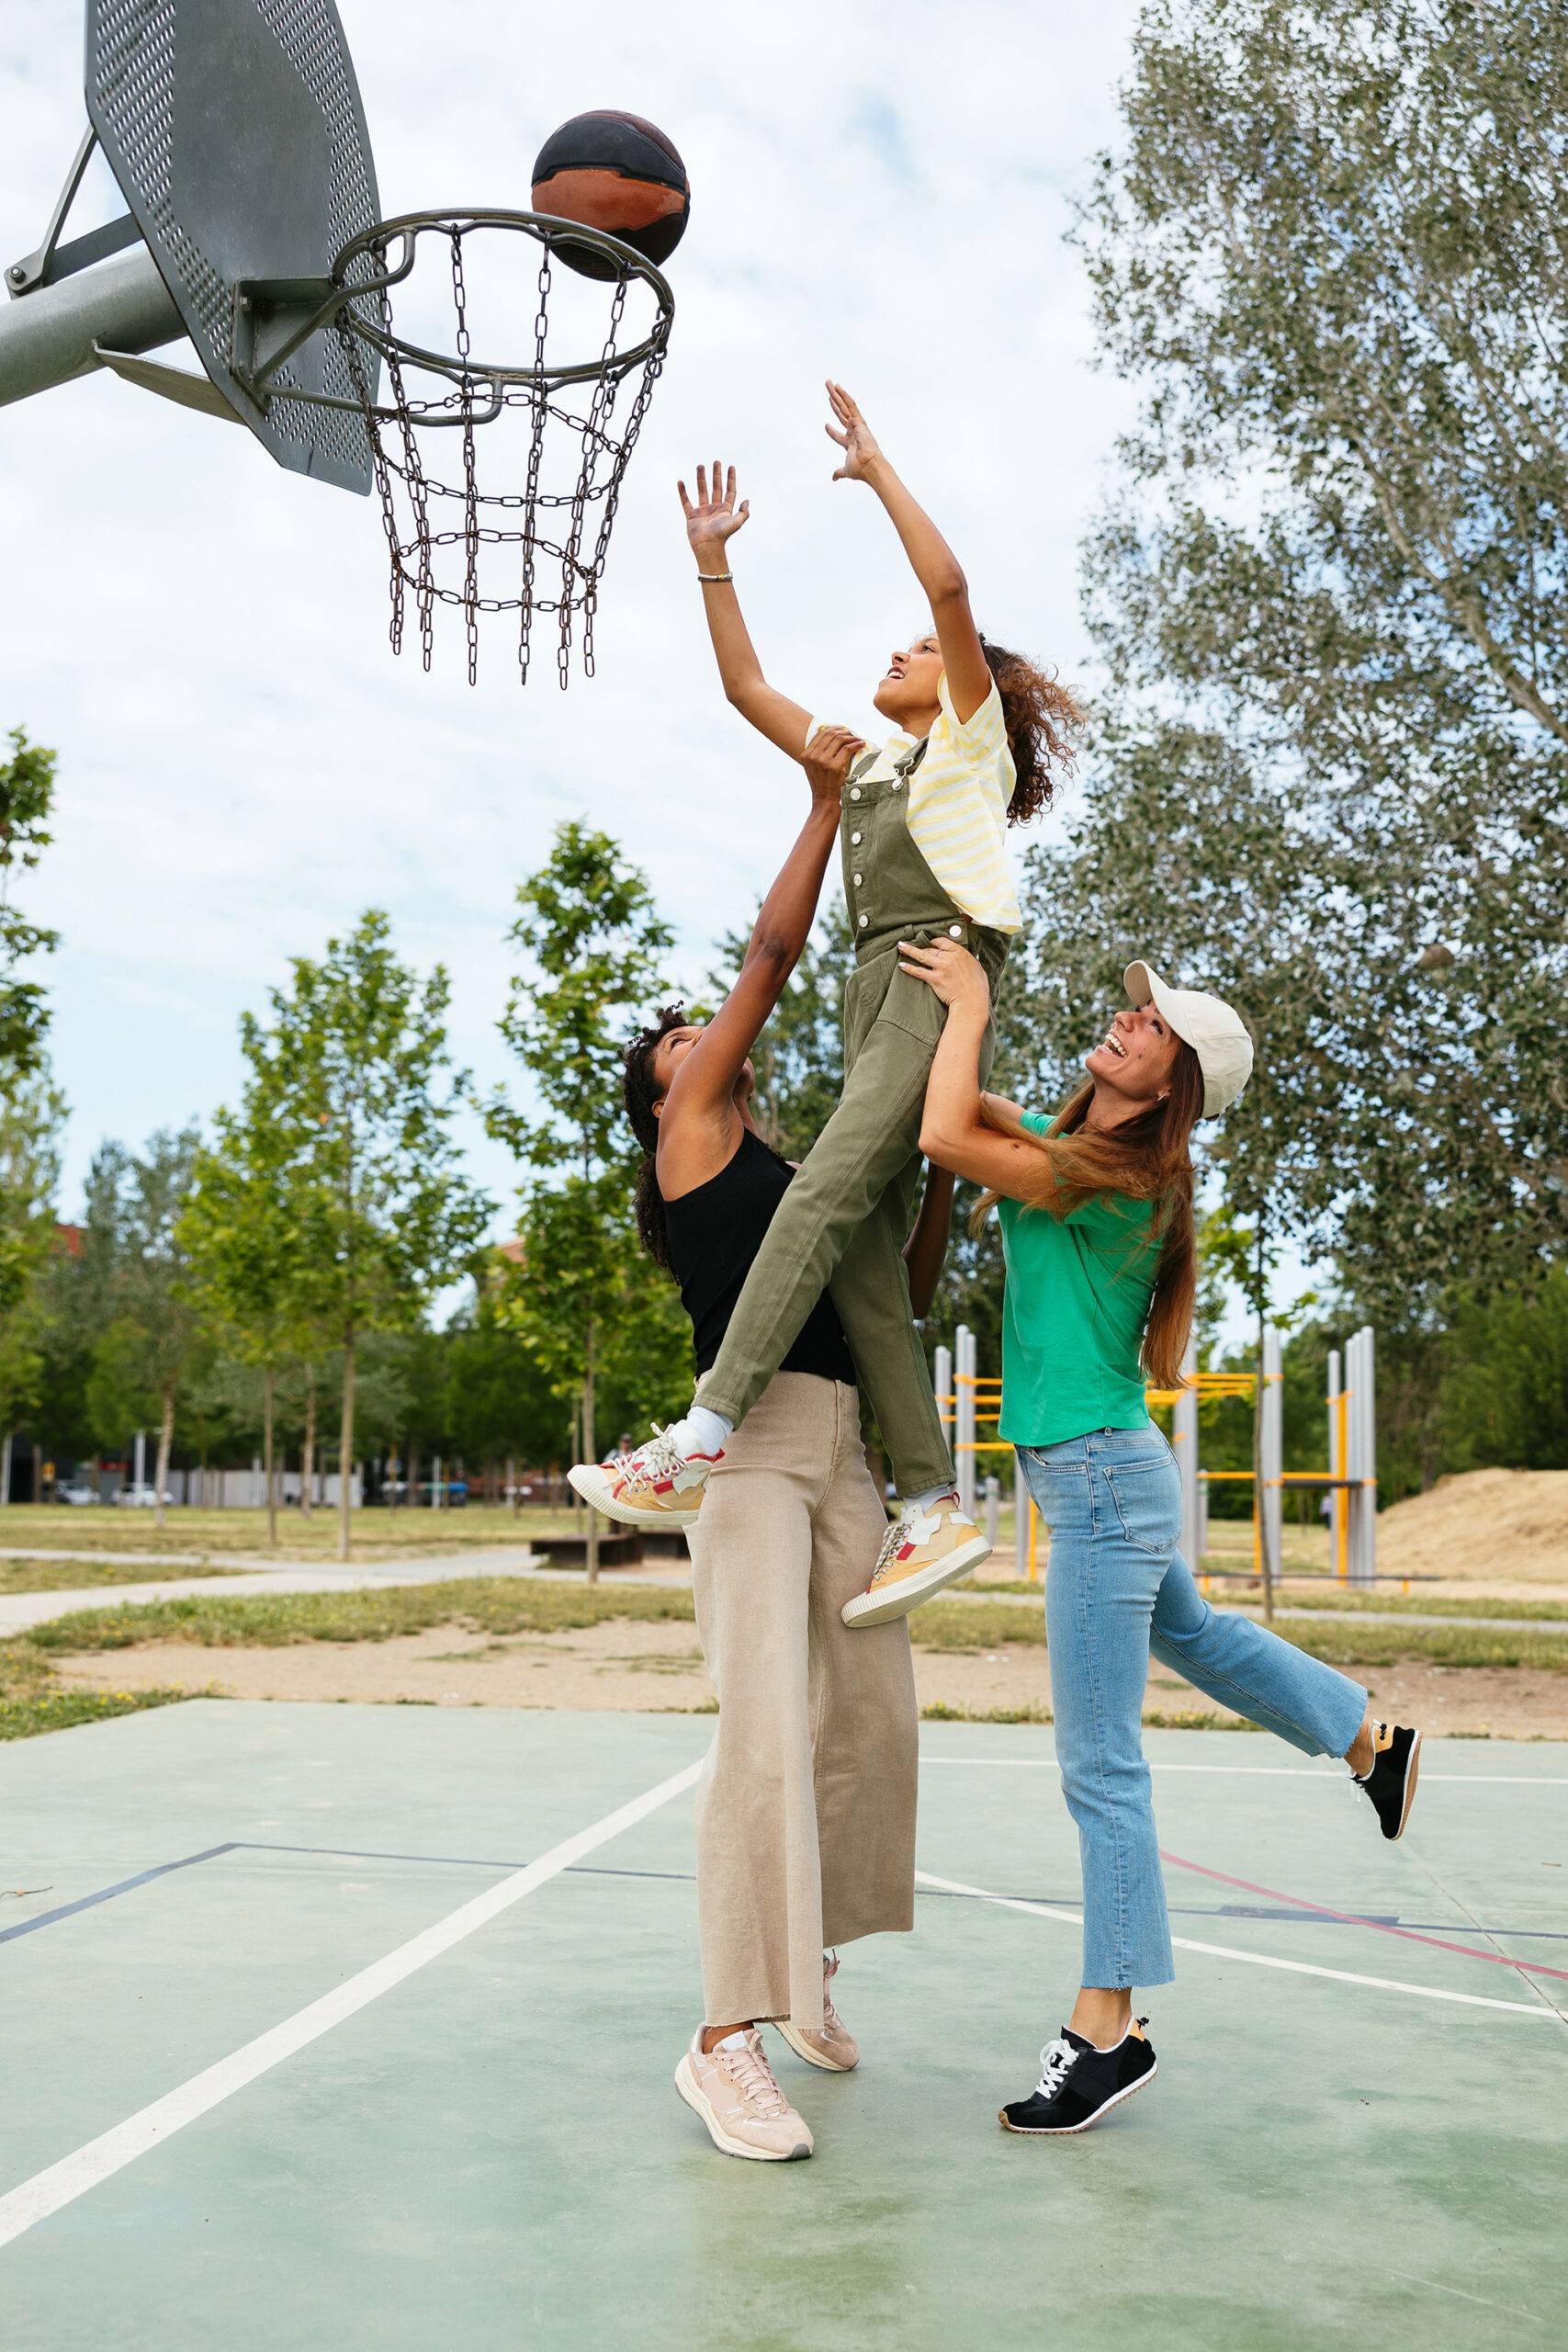 Same-sex parents with their daughter playing basketball in outdoor basketball court on a summer day